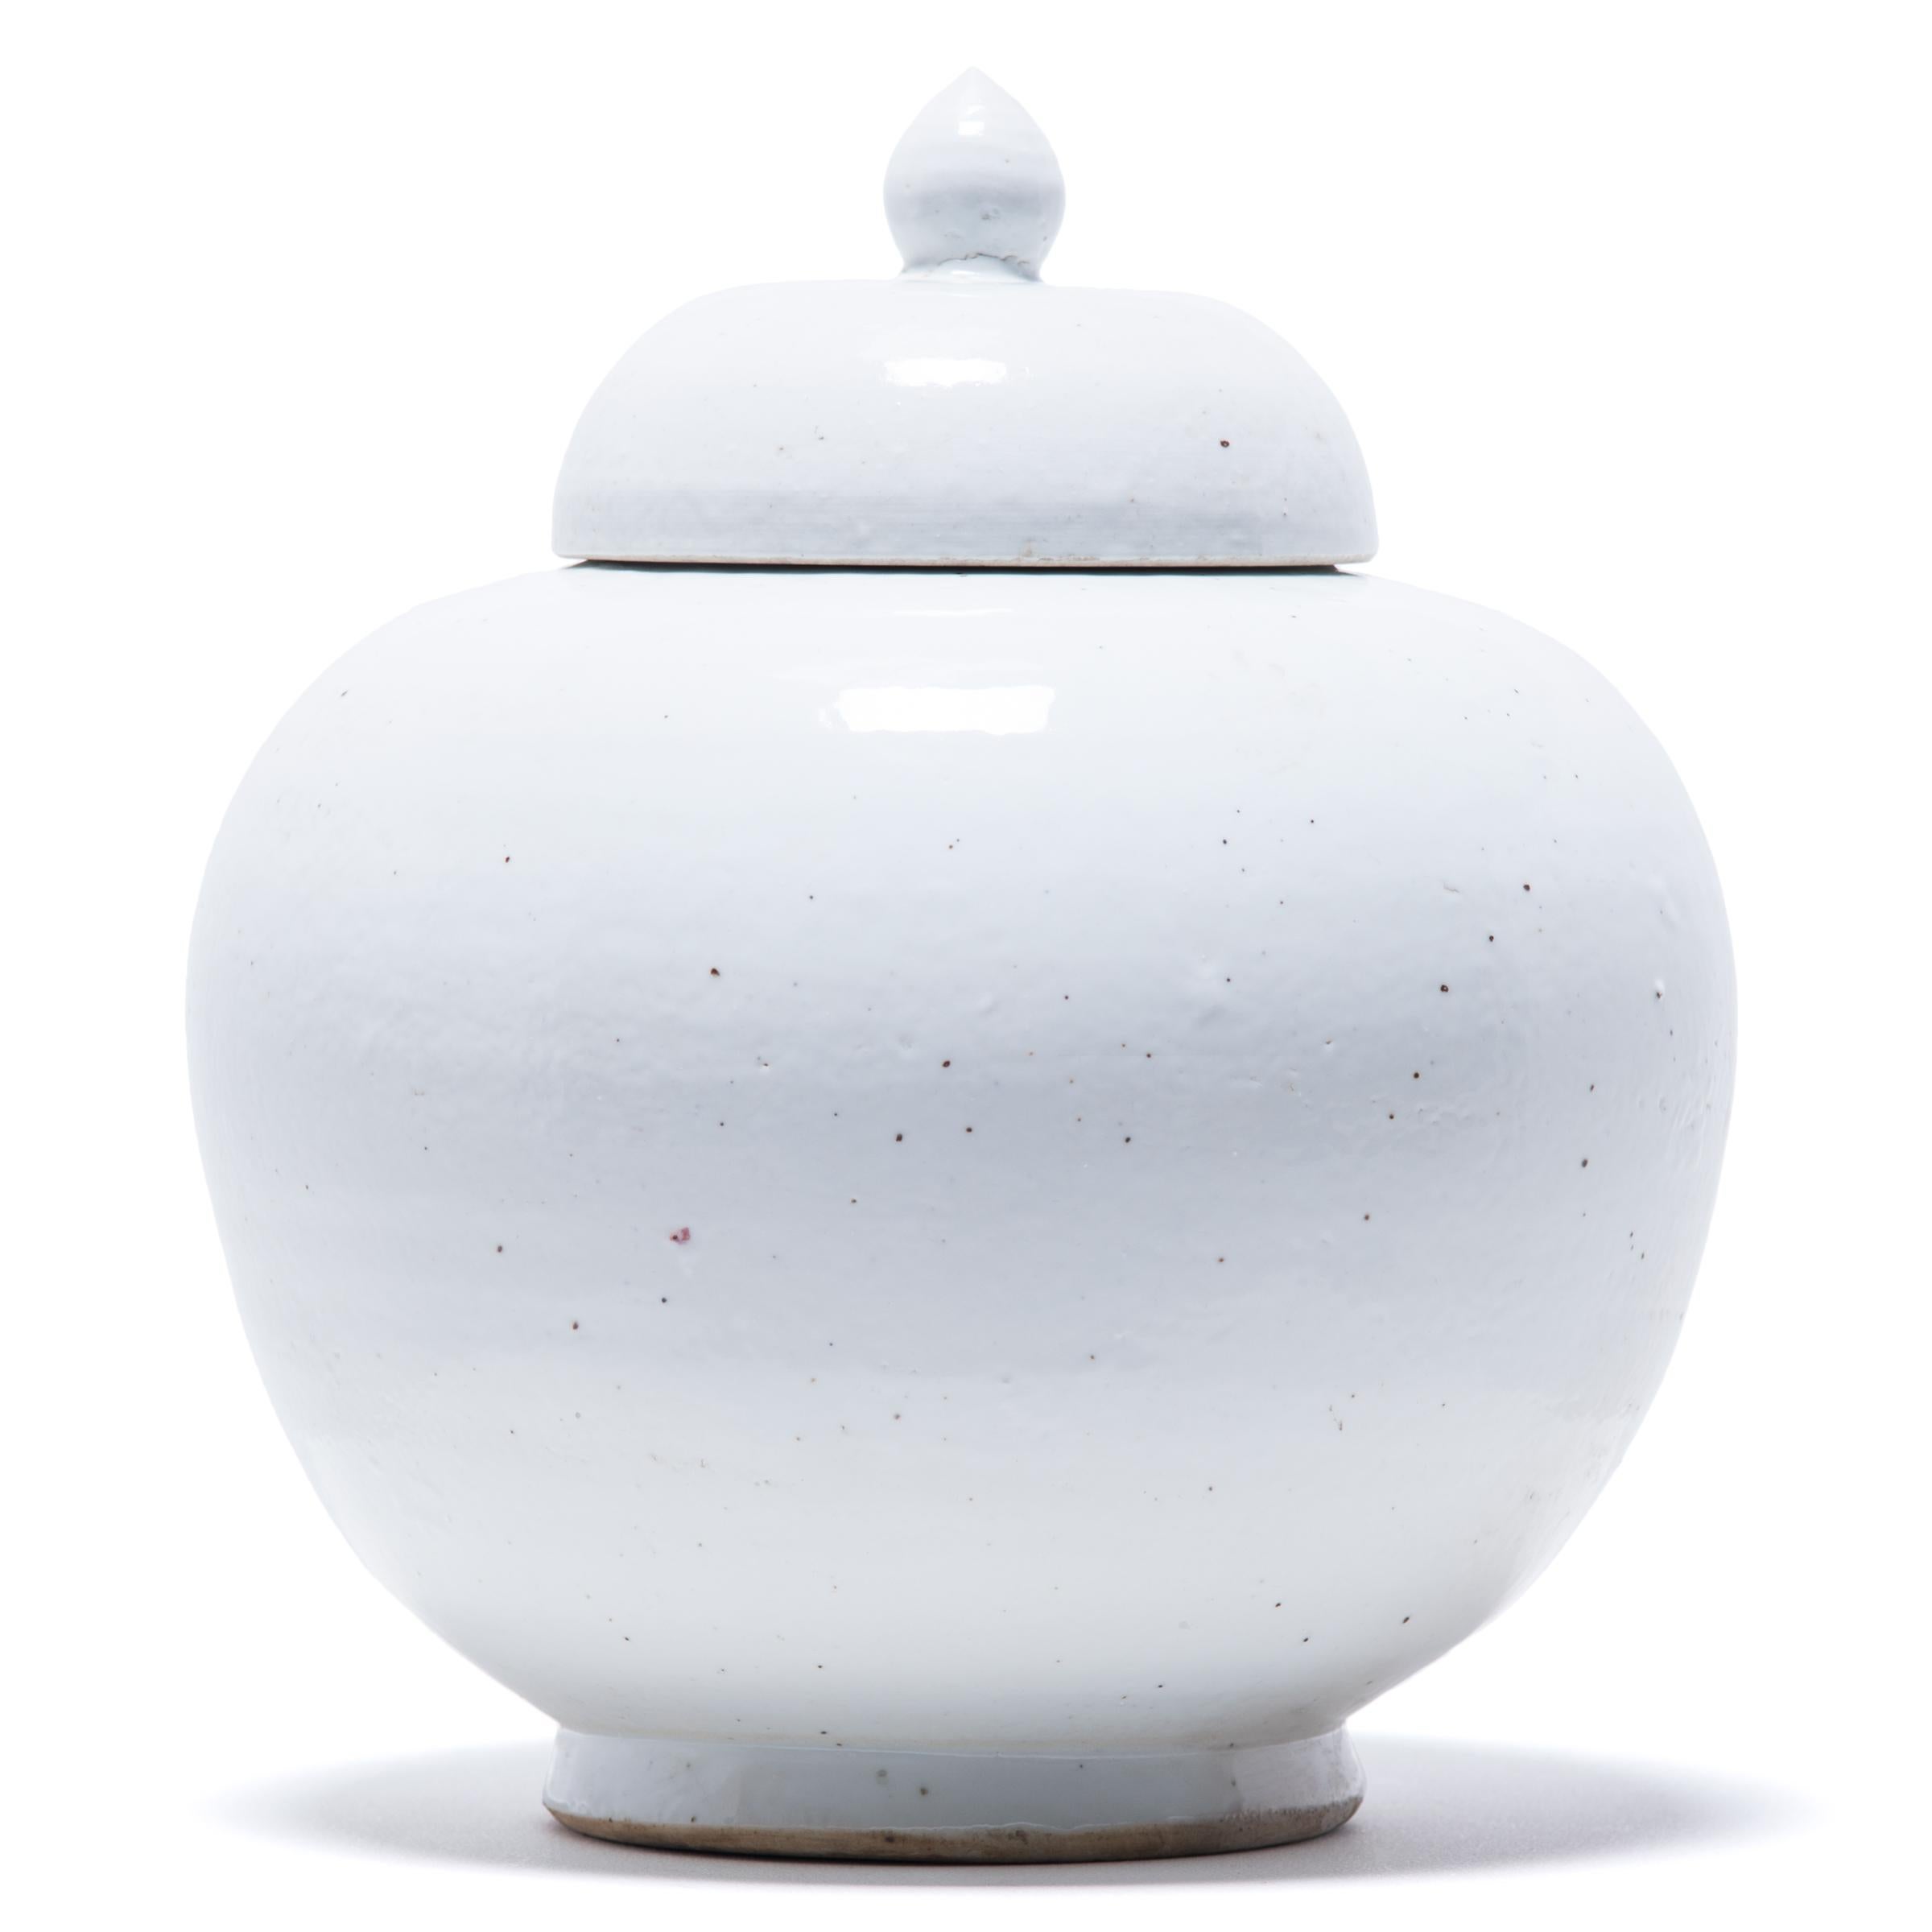 A milky white glaze emphasizes the sculptural form of this contemporary update on a Chinese classic. Refining the traditional onion shape, the lidded jar’s monochromatic look draws attention to its clean lines and subtle graduated curves.